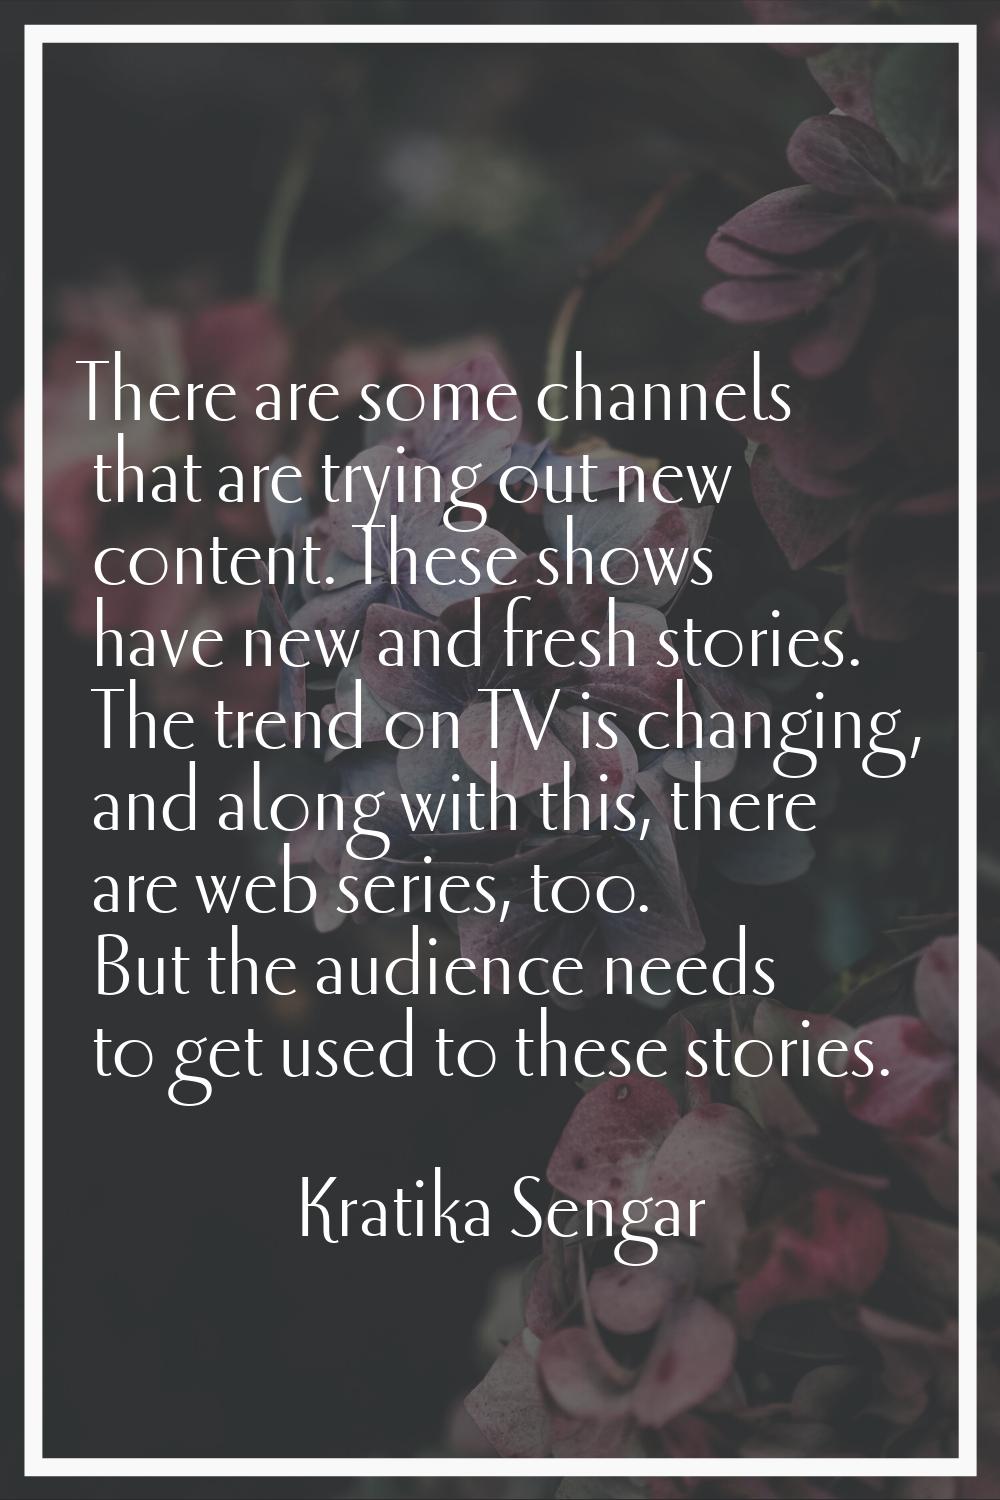 There are some channels that are trying out new content. These shows have new and fresh stories. Th